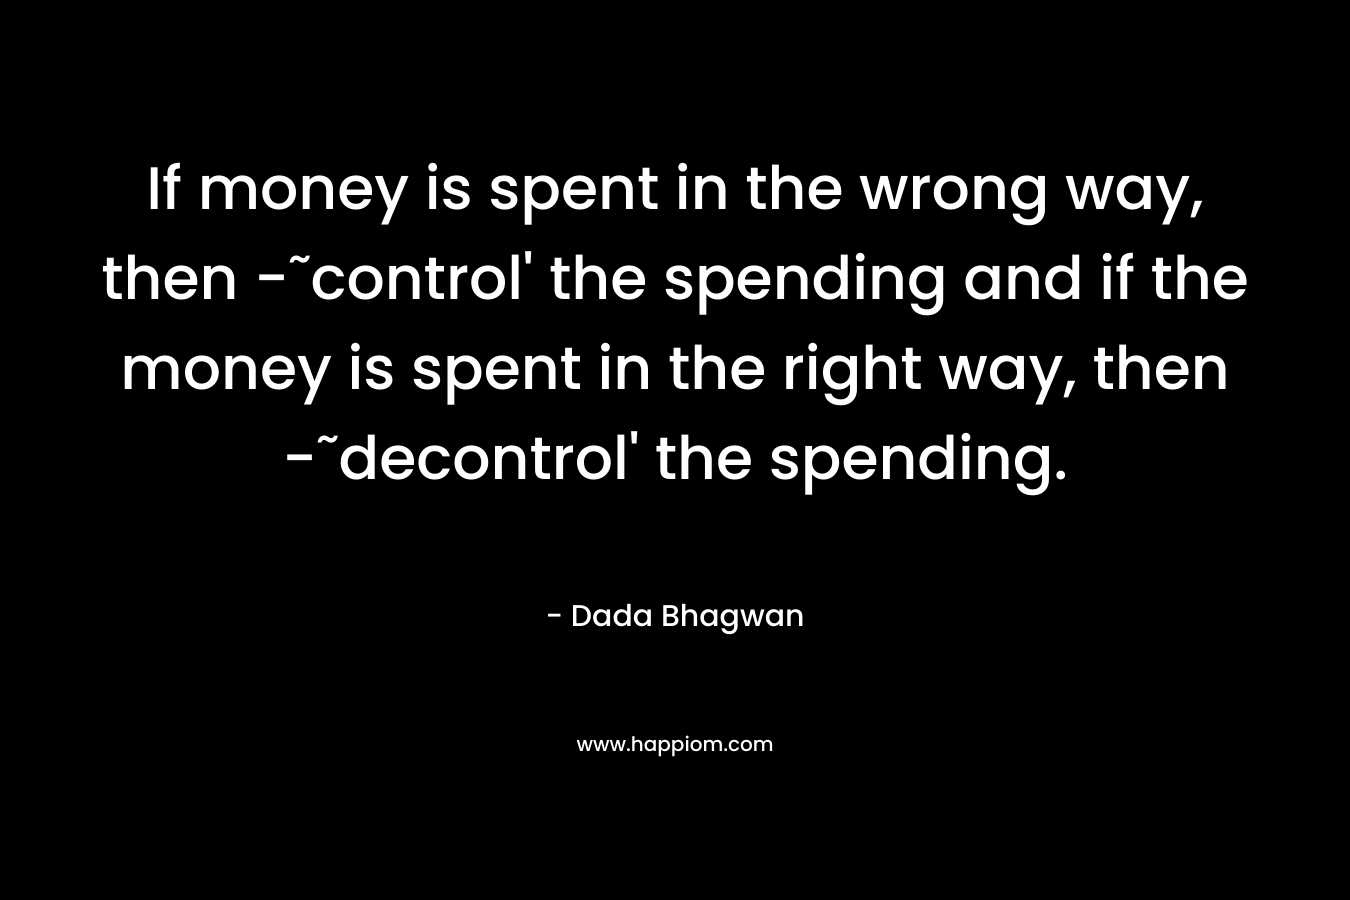 If money is spent in the wrong way, then -˜control' the spending and if the money is spent in the right way, then -˜decontrol' the spending.